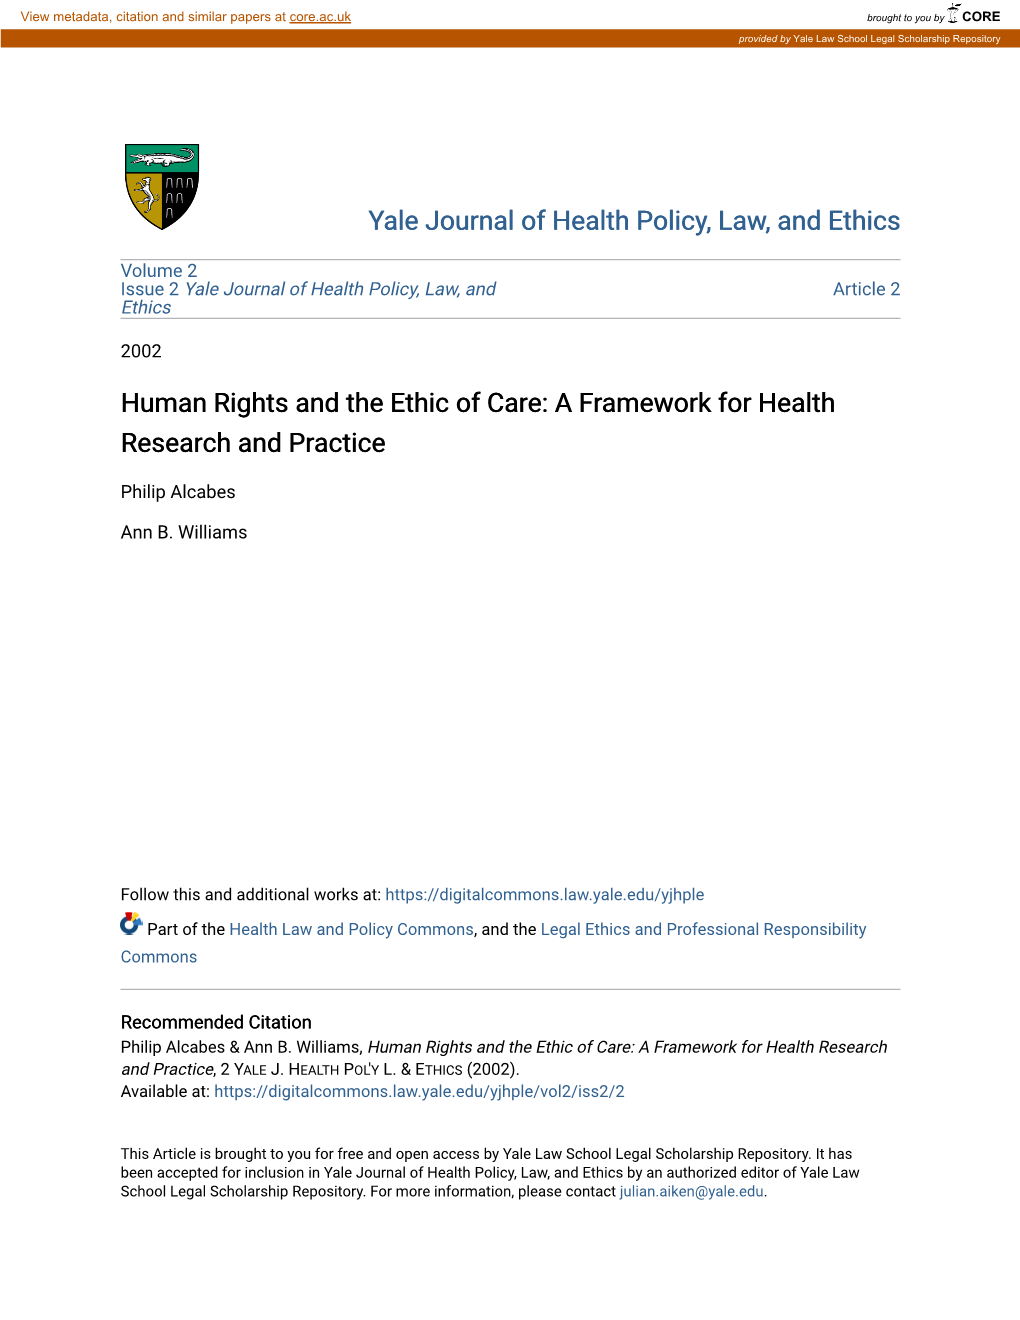 Human Rights and the Ethic of Care: a Framework for Health Research and Practice